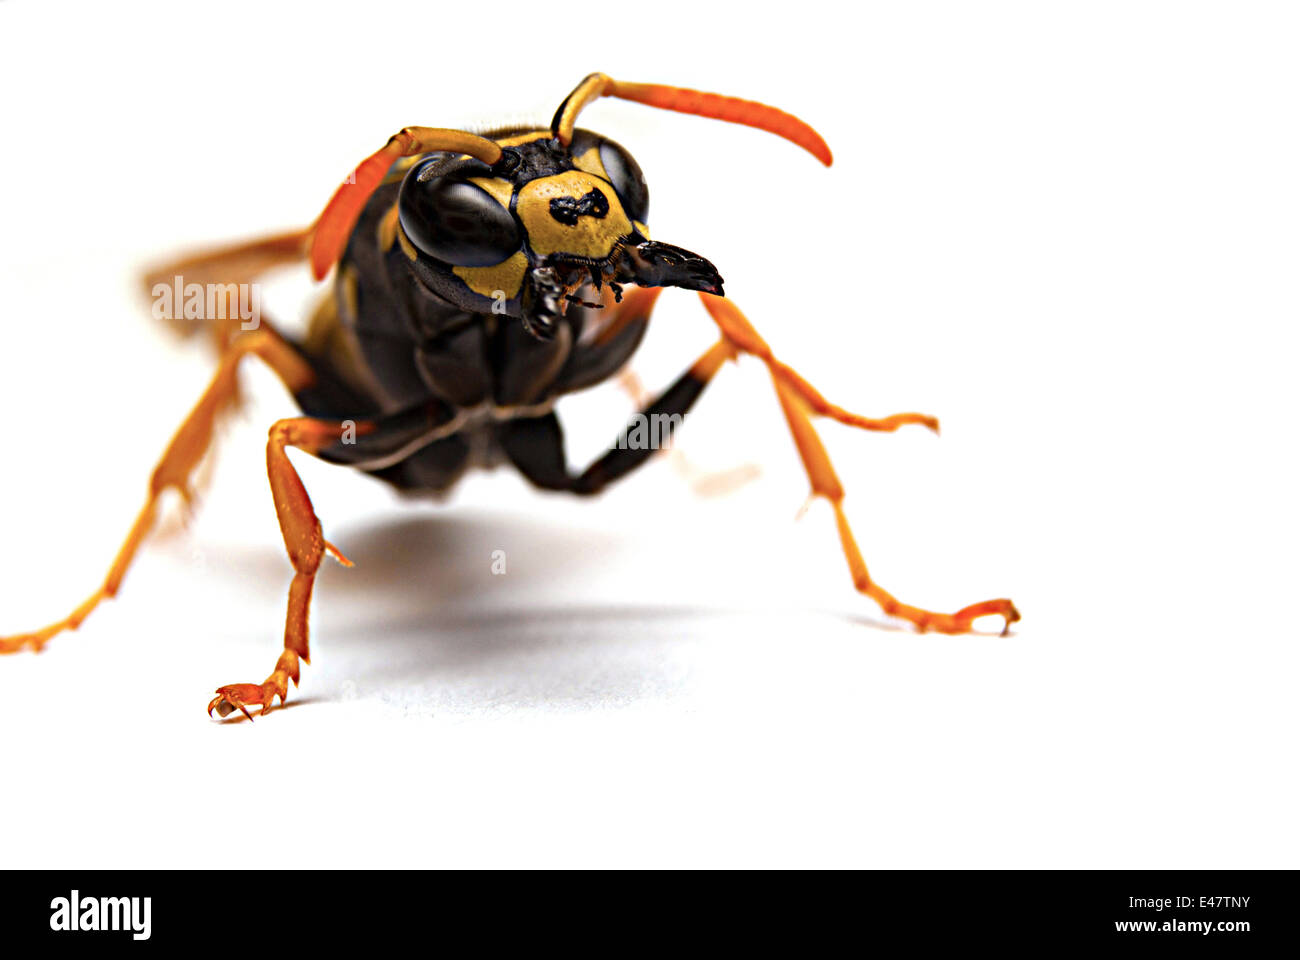 Wasp attack with open mandibles or mouth on white background macrophotography Stock Photo